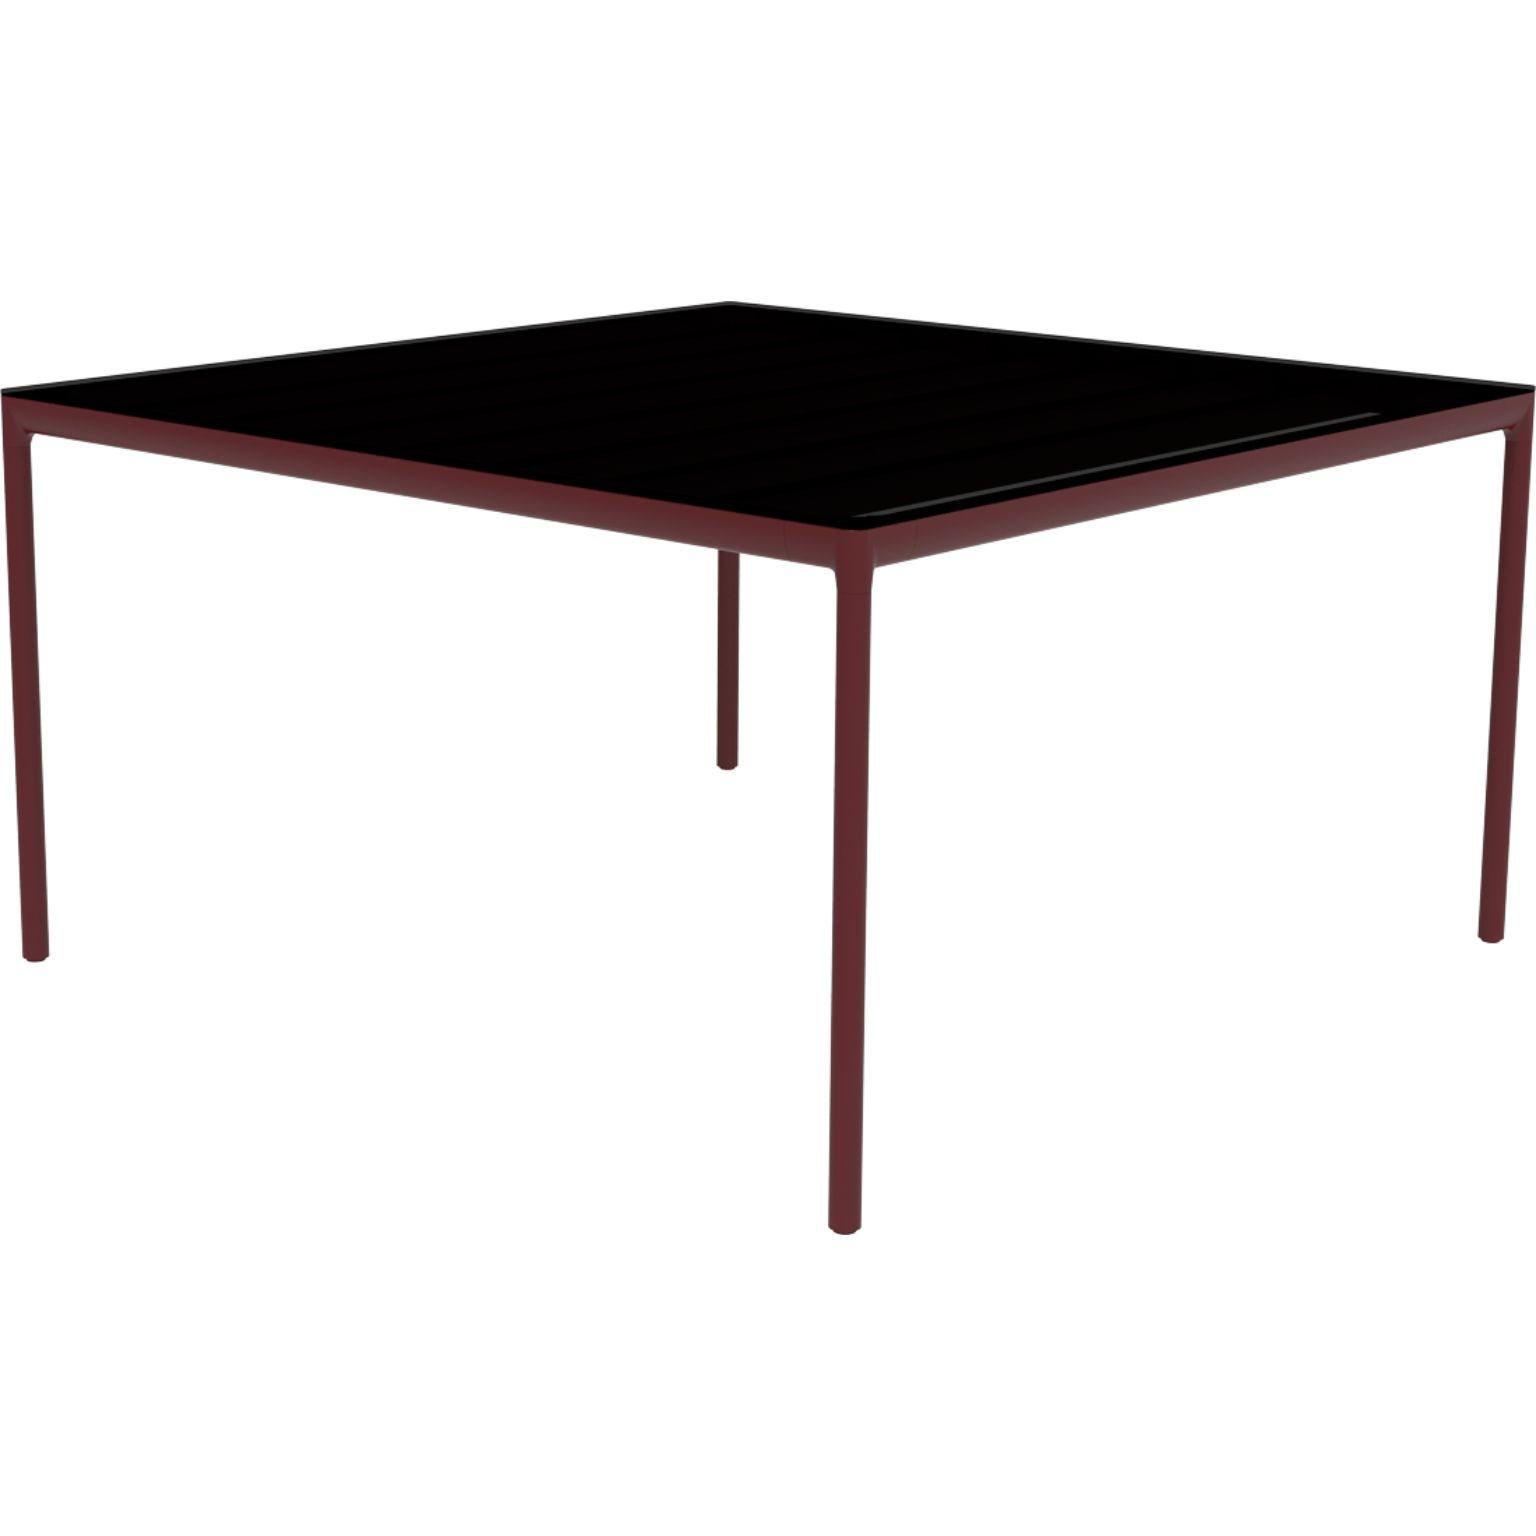 Ribbons Burgundy 138 coffee table by MOWEE
Dimensions: D138 x W138 x H75 cm.
Material: Aluminum and HPL top.
Weight: 23 kg.
Also available in different colors and finishes. (HPL Black Edge or Neolith top). 

An unmistakable collection for its